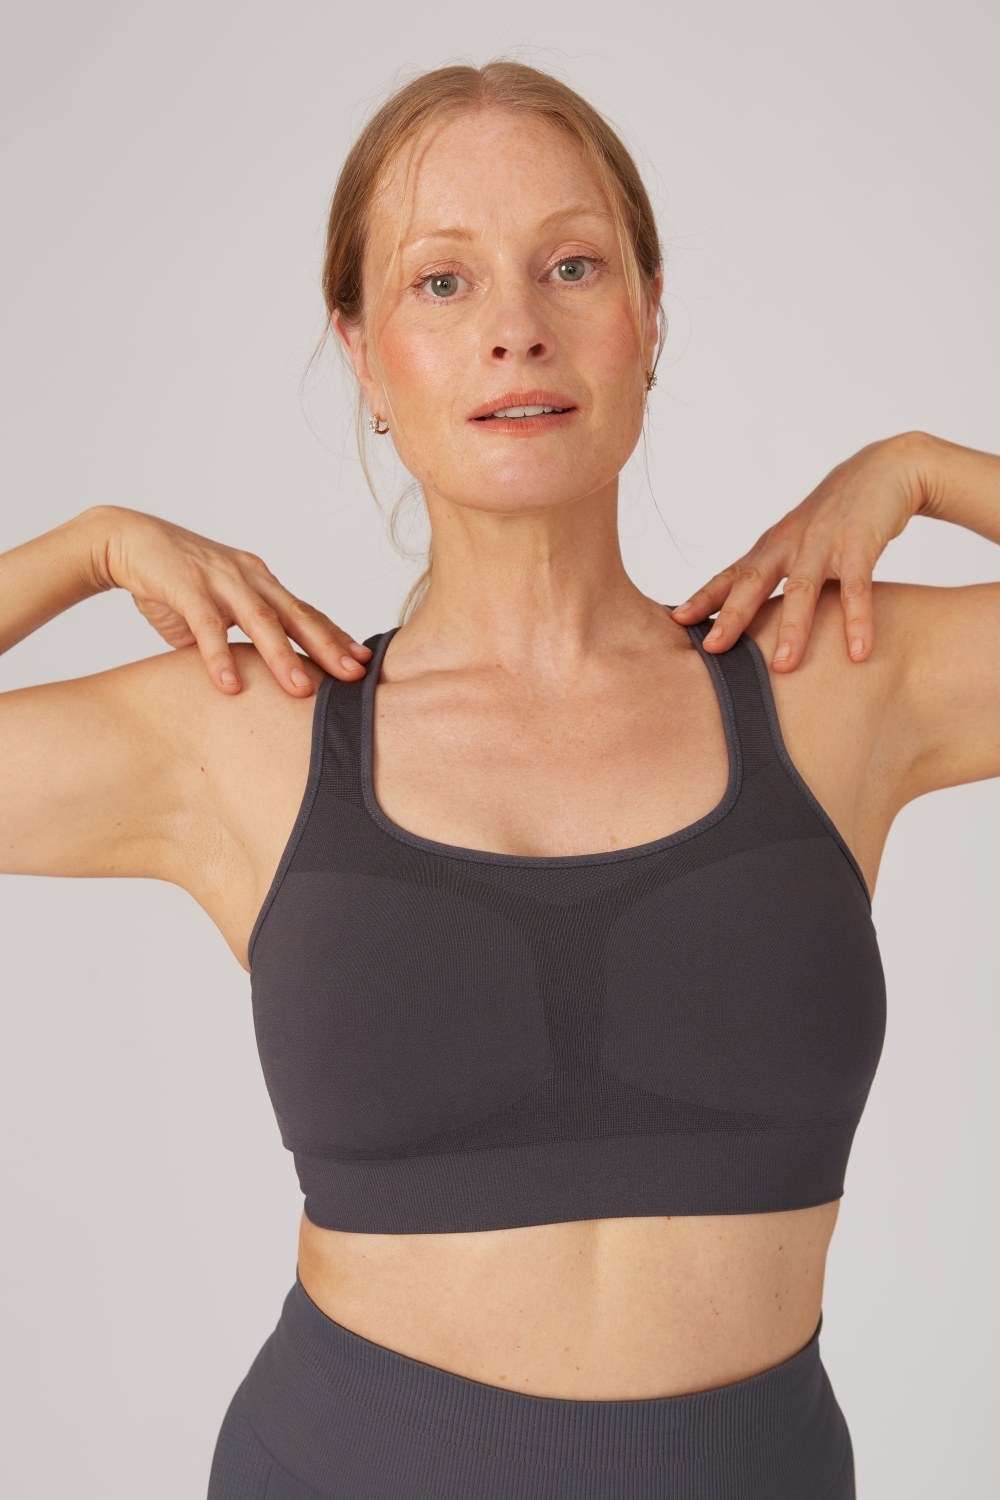 https://www.stroudyogaspace.com/wp-content/uploads/2022/01/fearless-hold-sports-bra-p381-23529_image.jpg